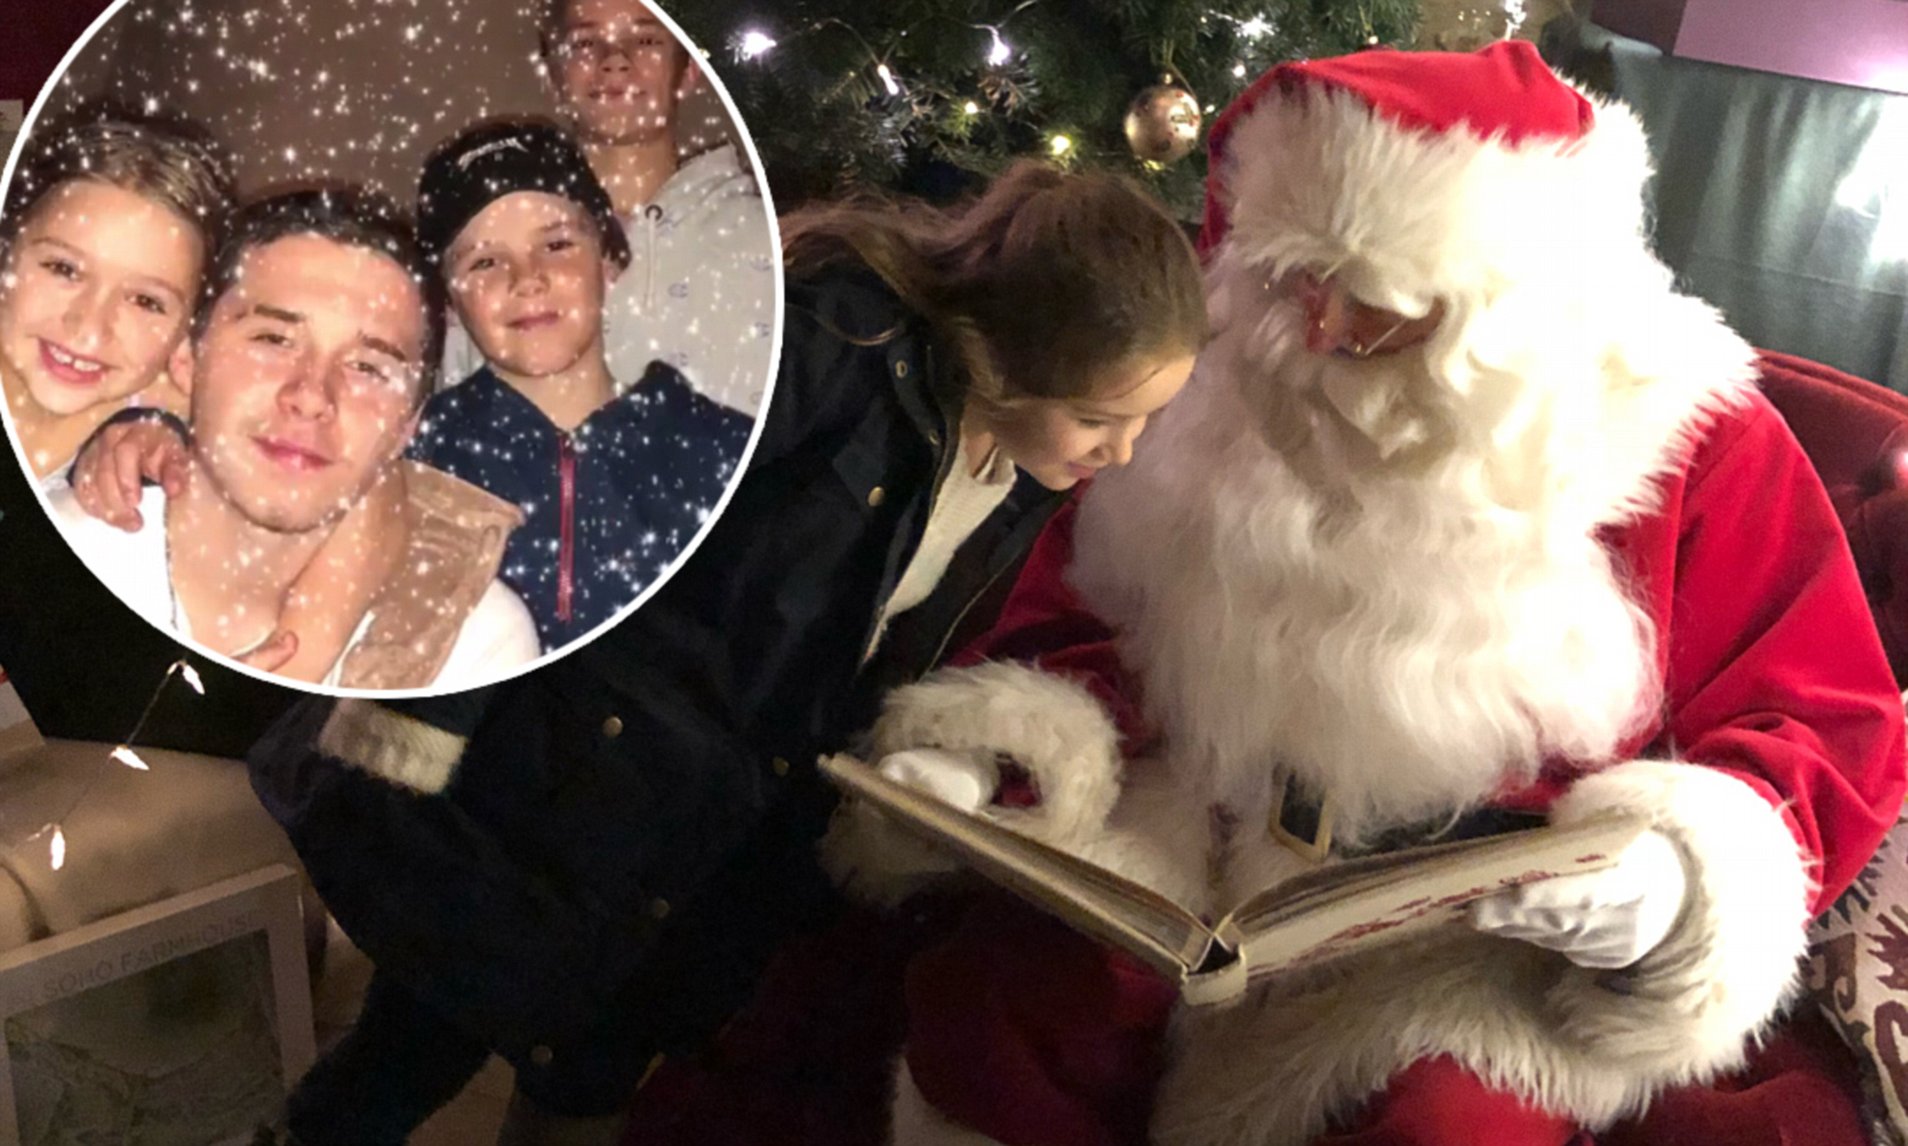 FEELING FESTIVE Victoria Beckham shares snap of David in his dressing gown with a Christmas hat on as they get into the festive spirit